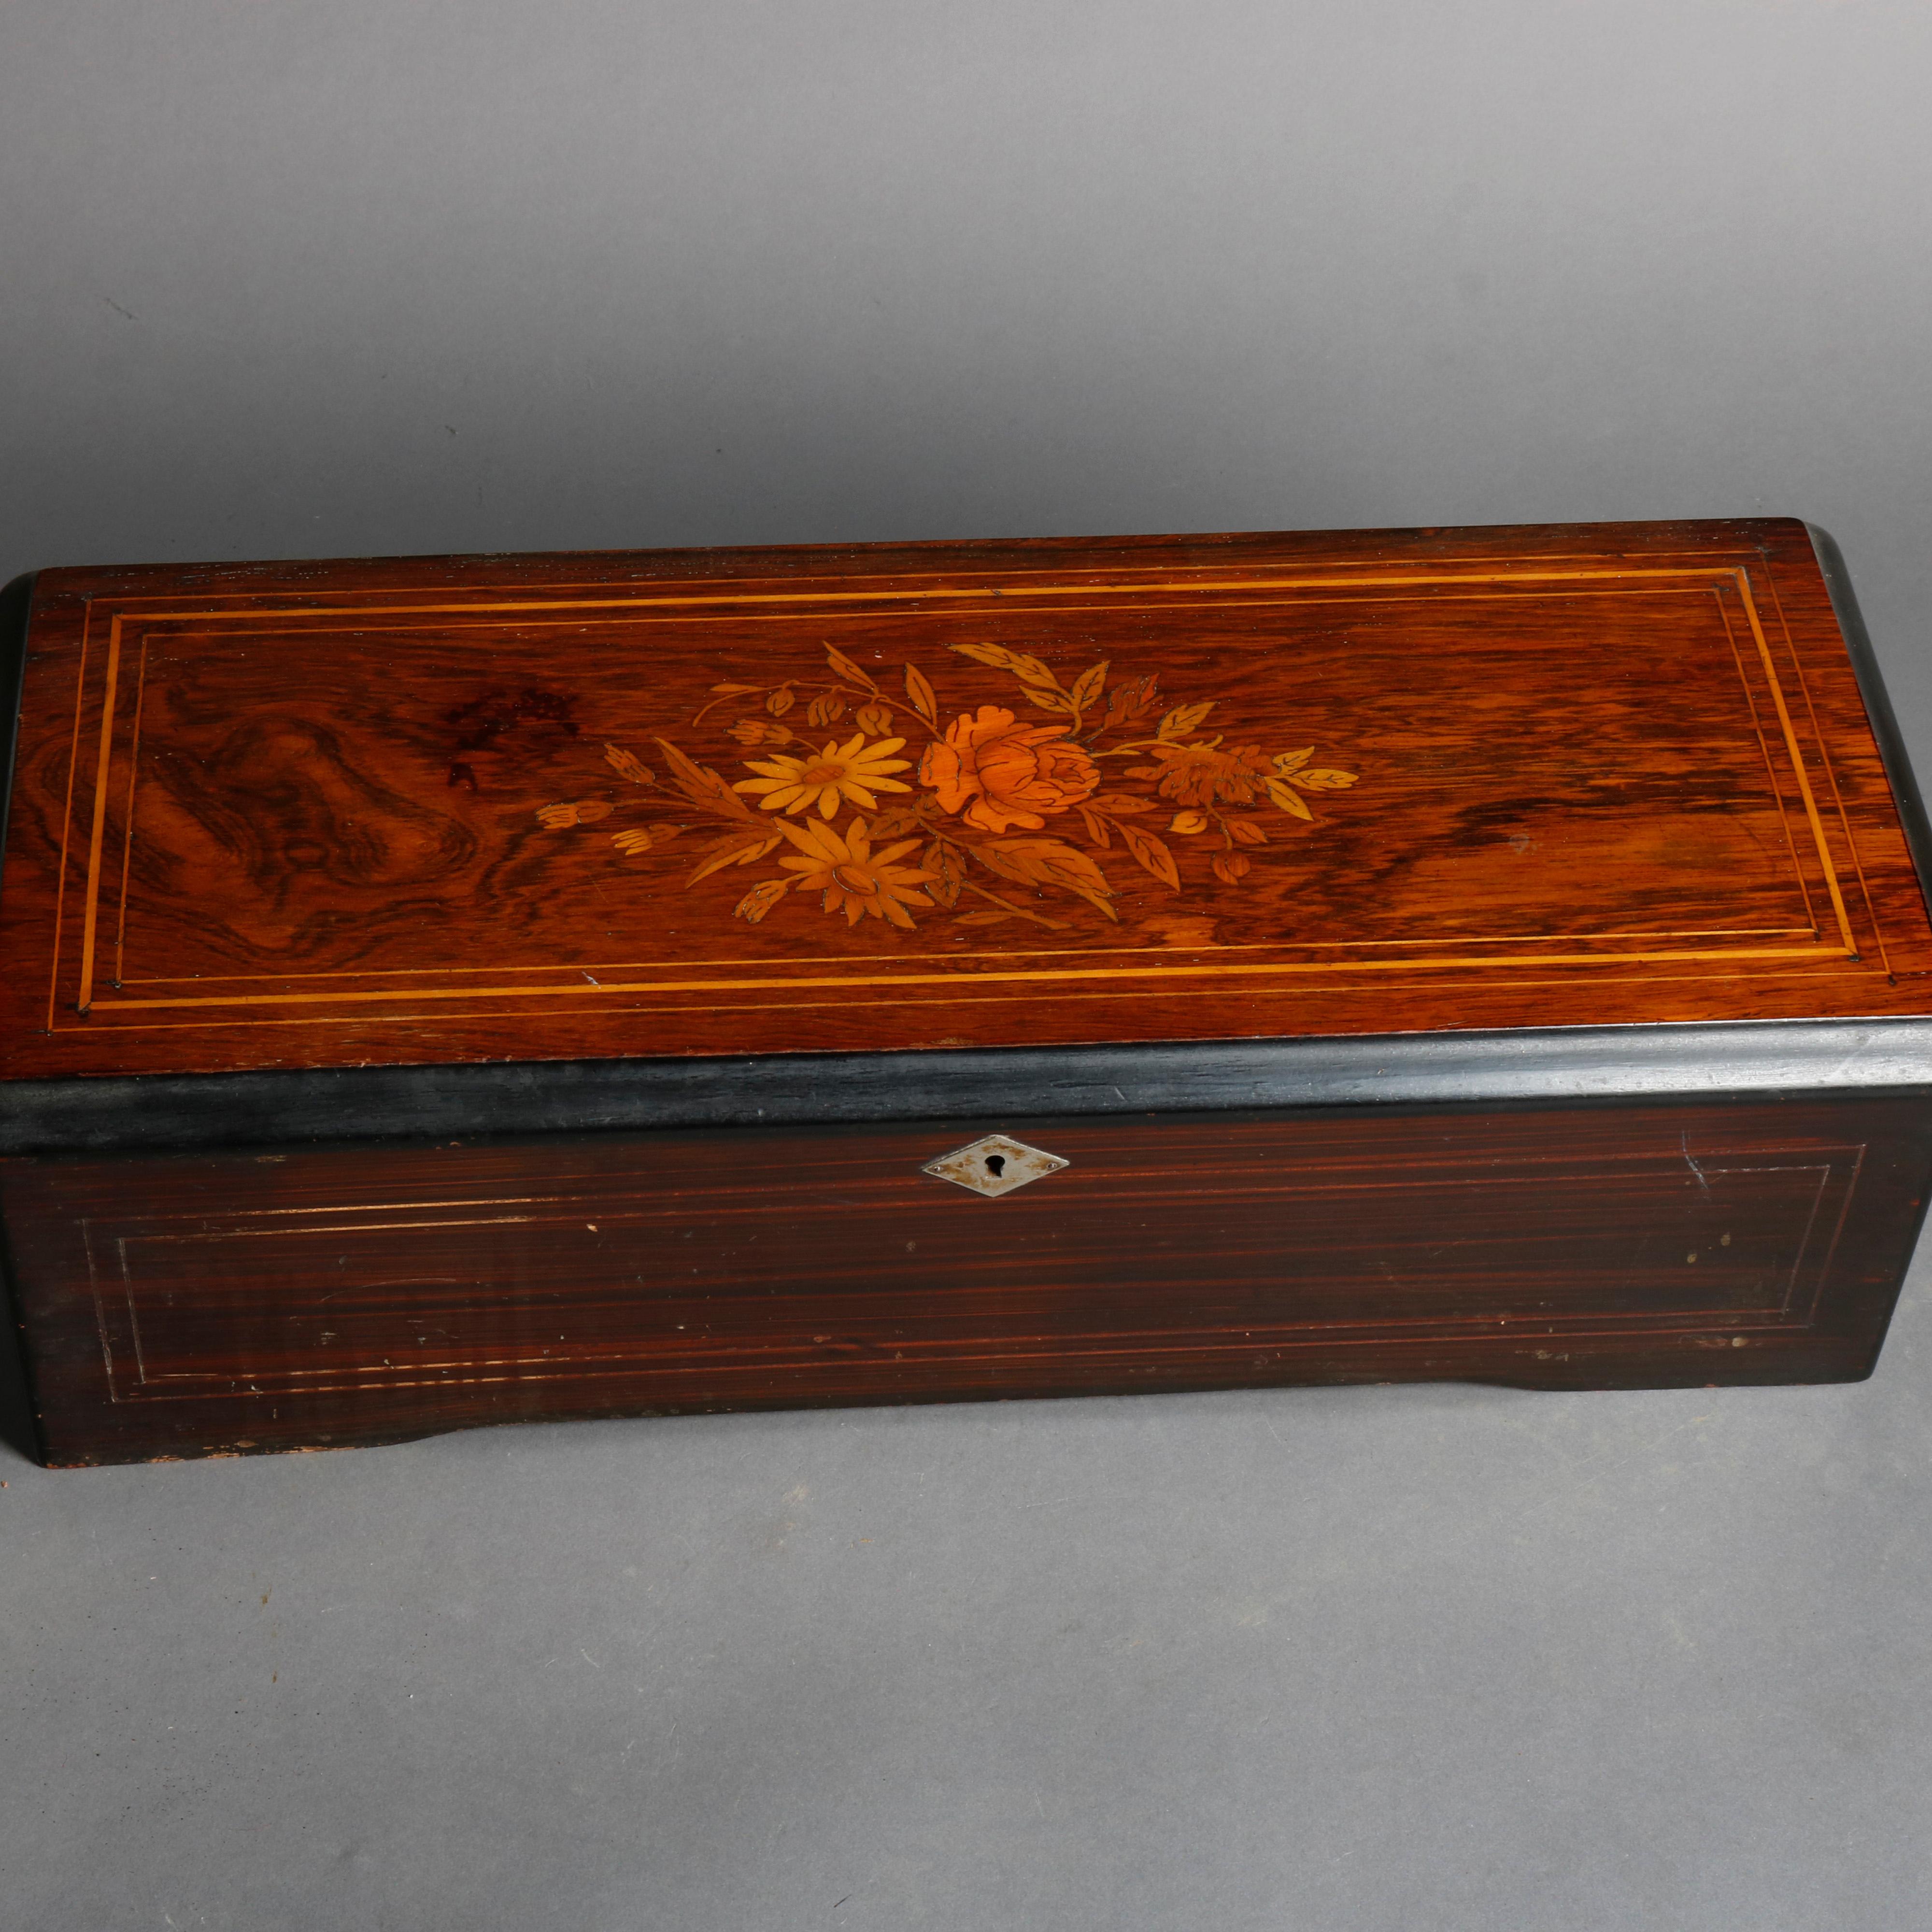 An antique Swiss 8-tune cylinder music box offers mahogany case with floral satinwood inlay mahogany top opening to reveal original tune card surmounting glass covered works, circa 1890

Measures: 5.75